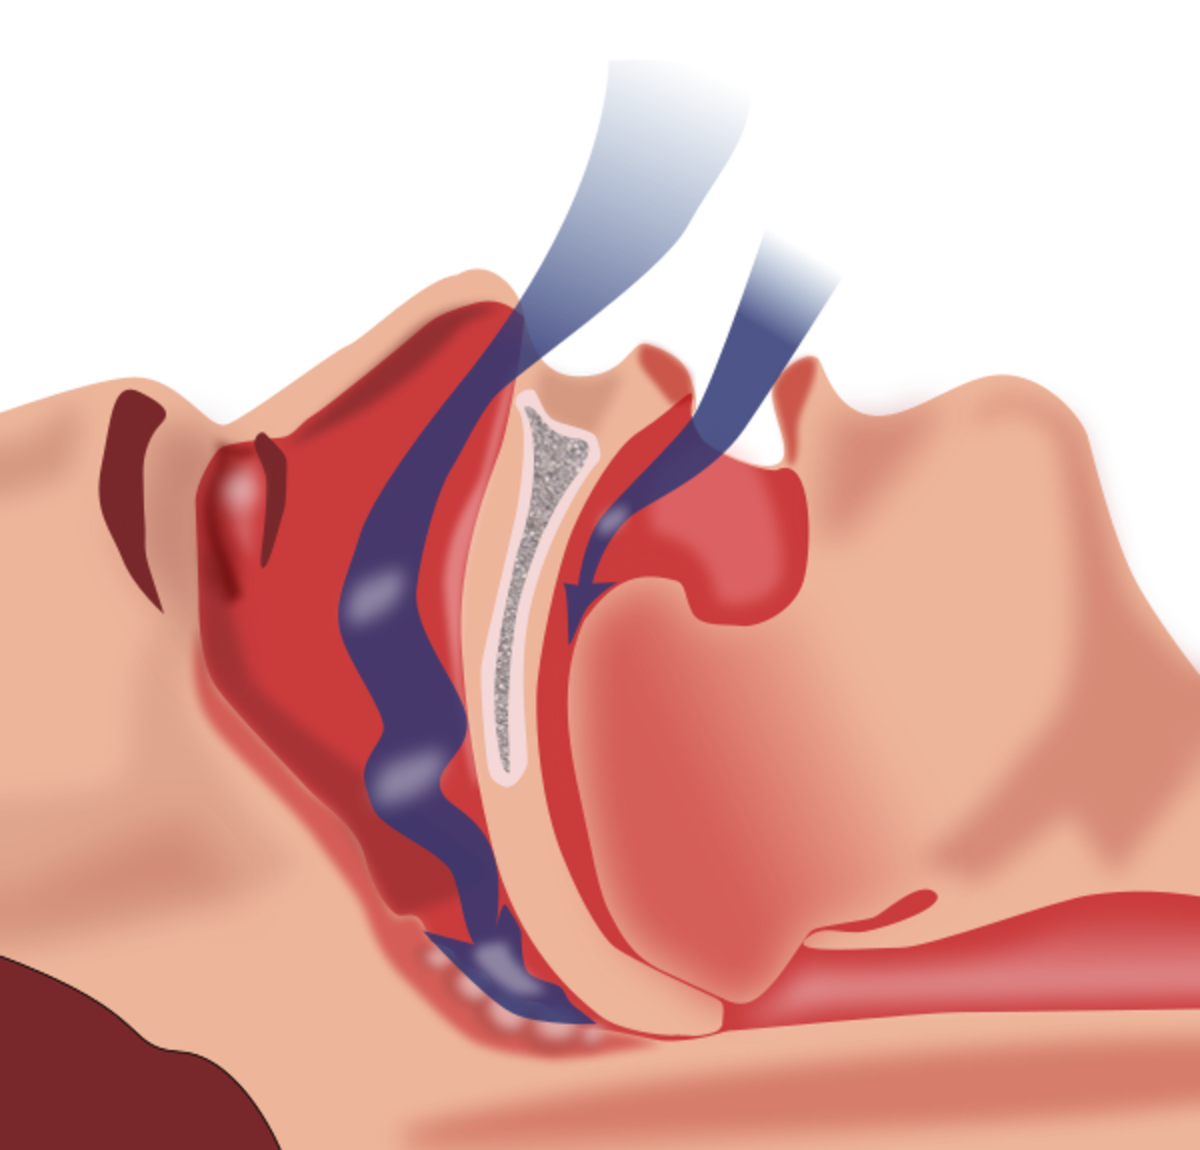 are-you-at-risk-for-sleep-apnea